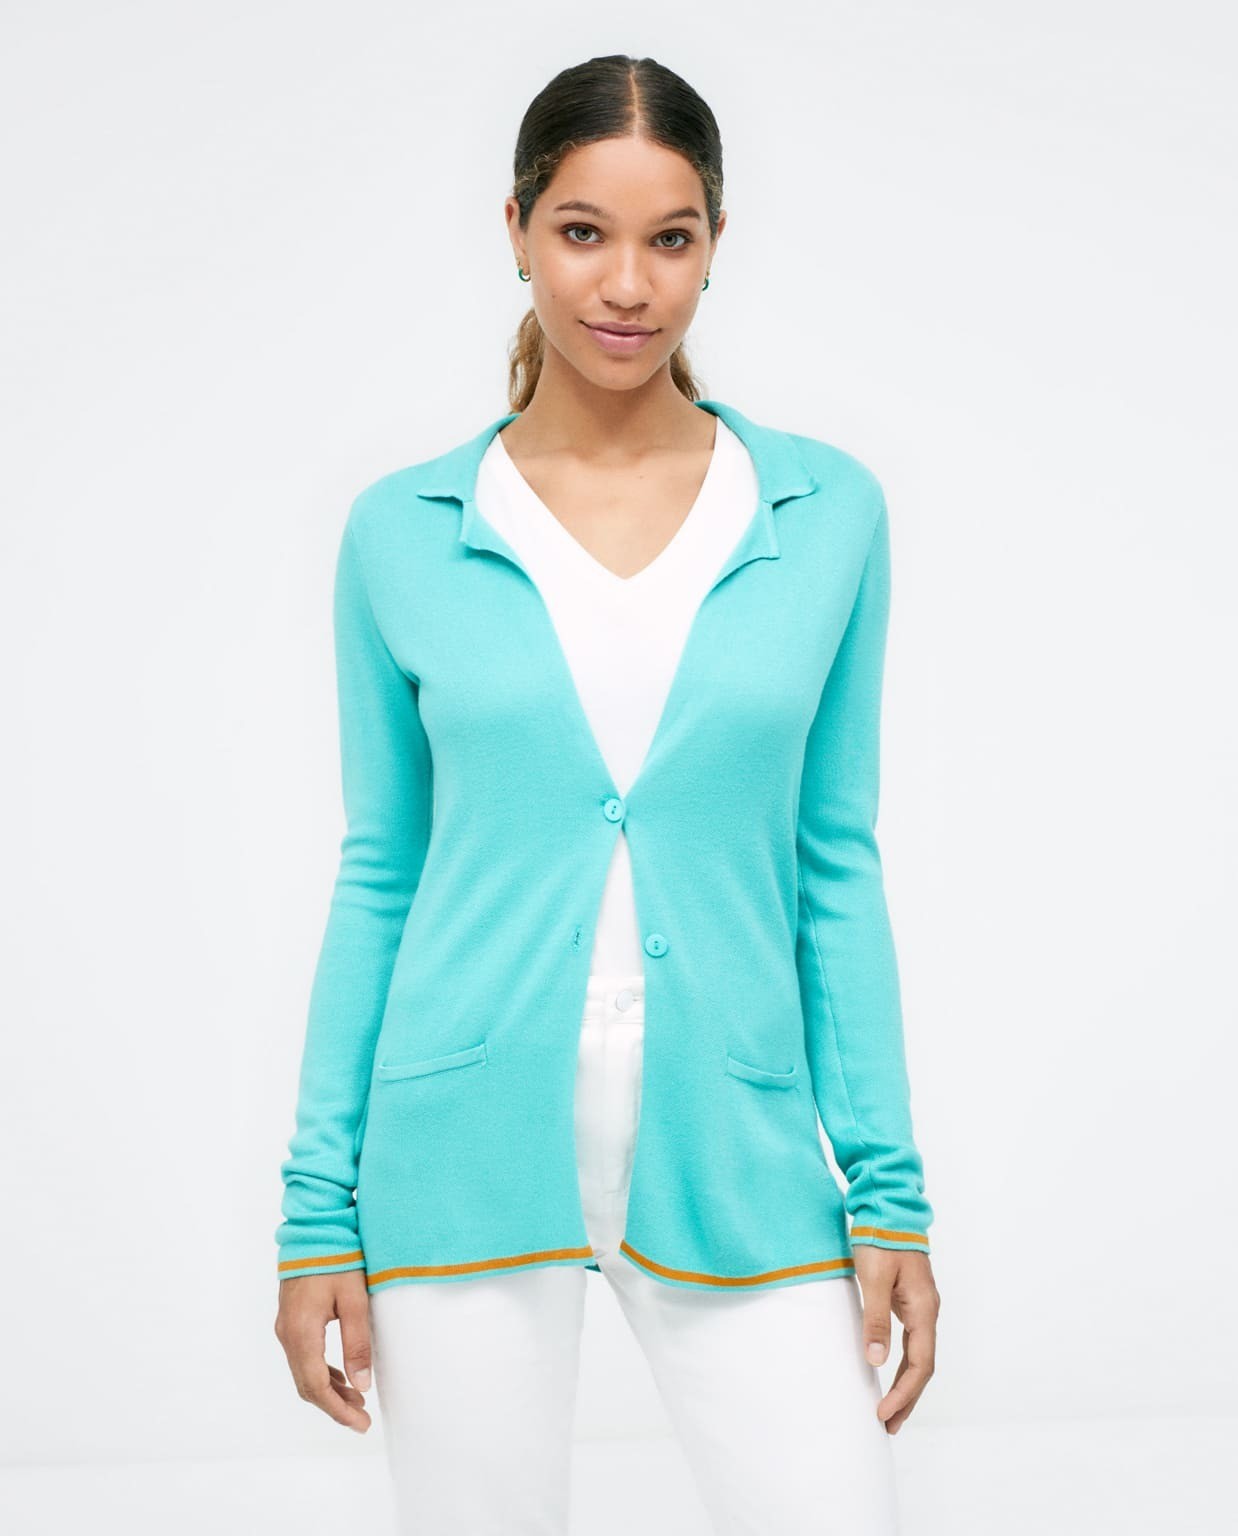 Knitted jacket with pockets. Plain  Turquoise